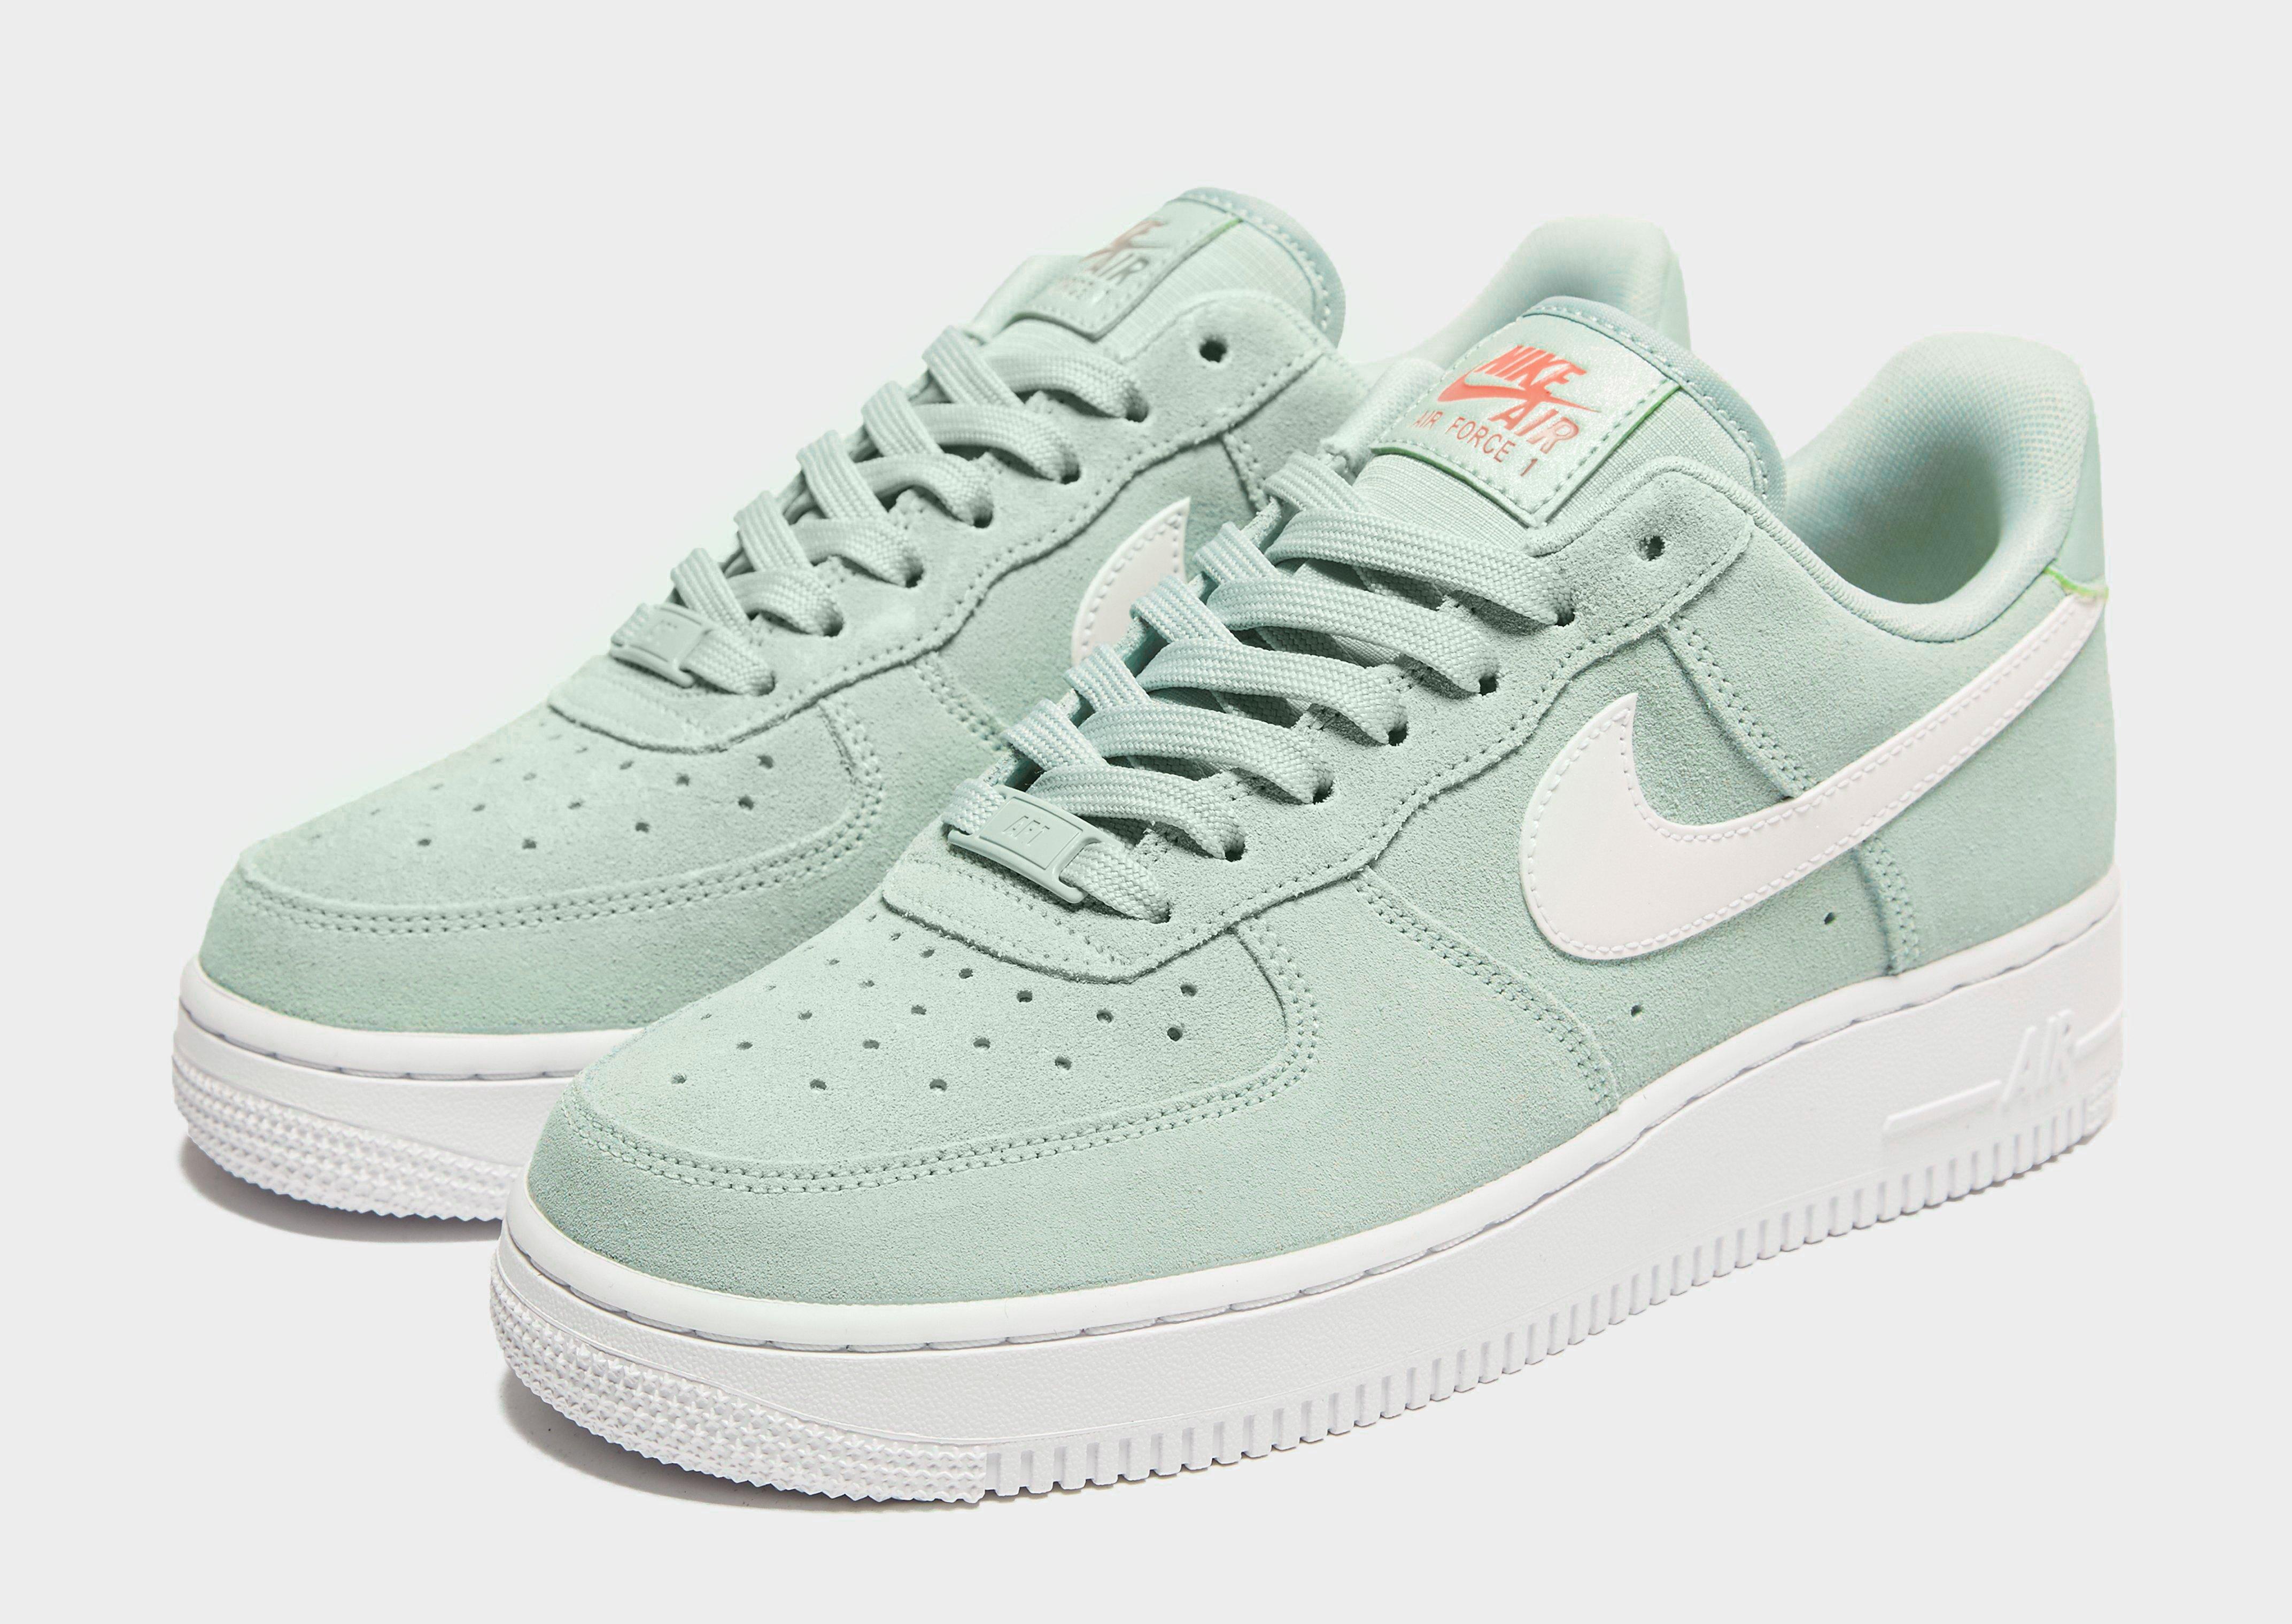 nike air force 1 07 lv8 verde factory outlet e35f1 1c363